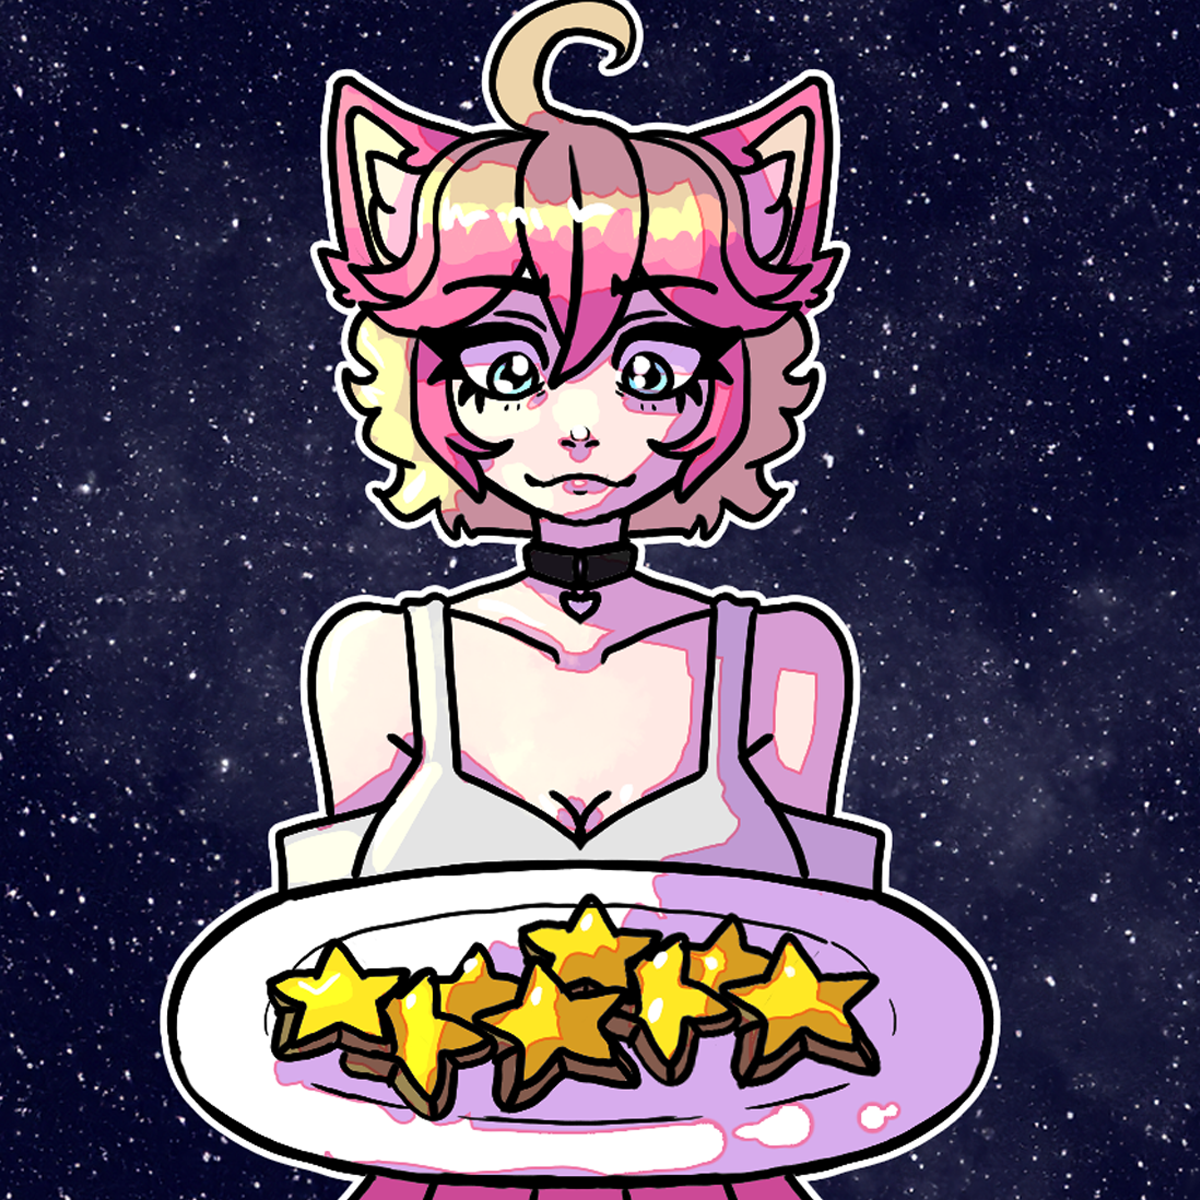 STAR COOKIE